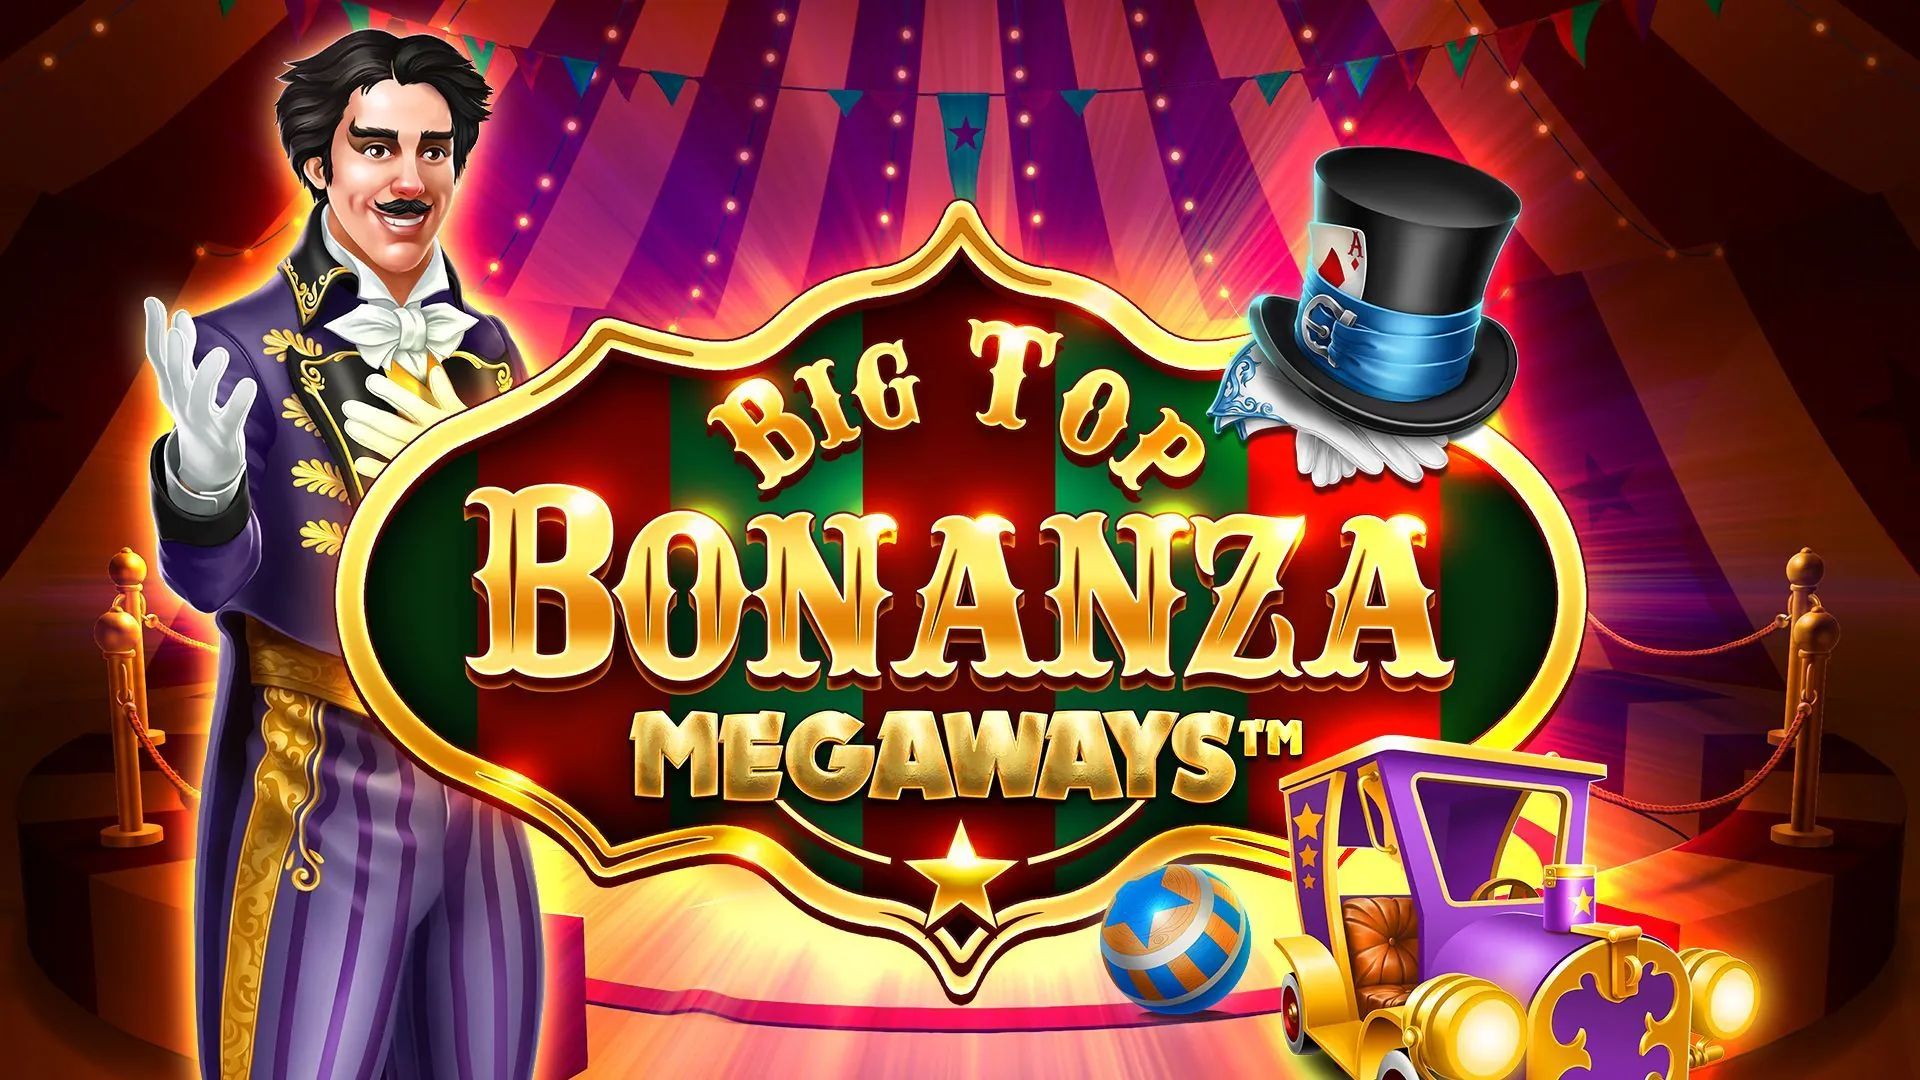 Big Top Bonanza Megaways™  is out now!